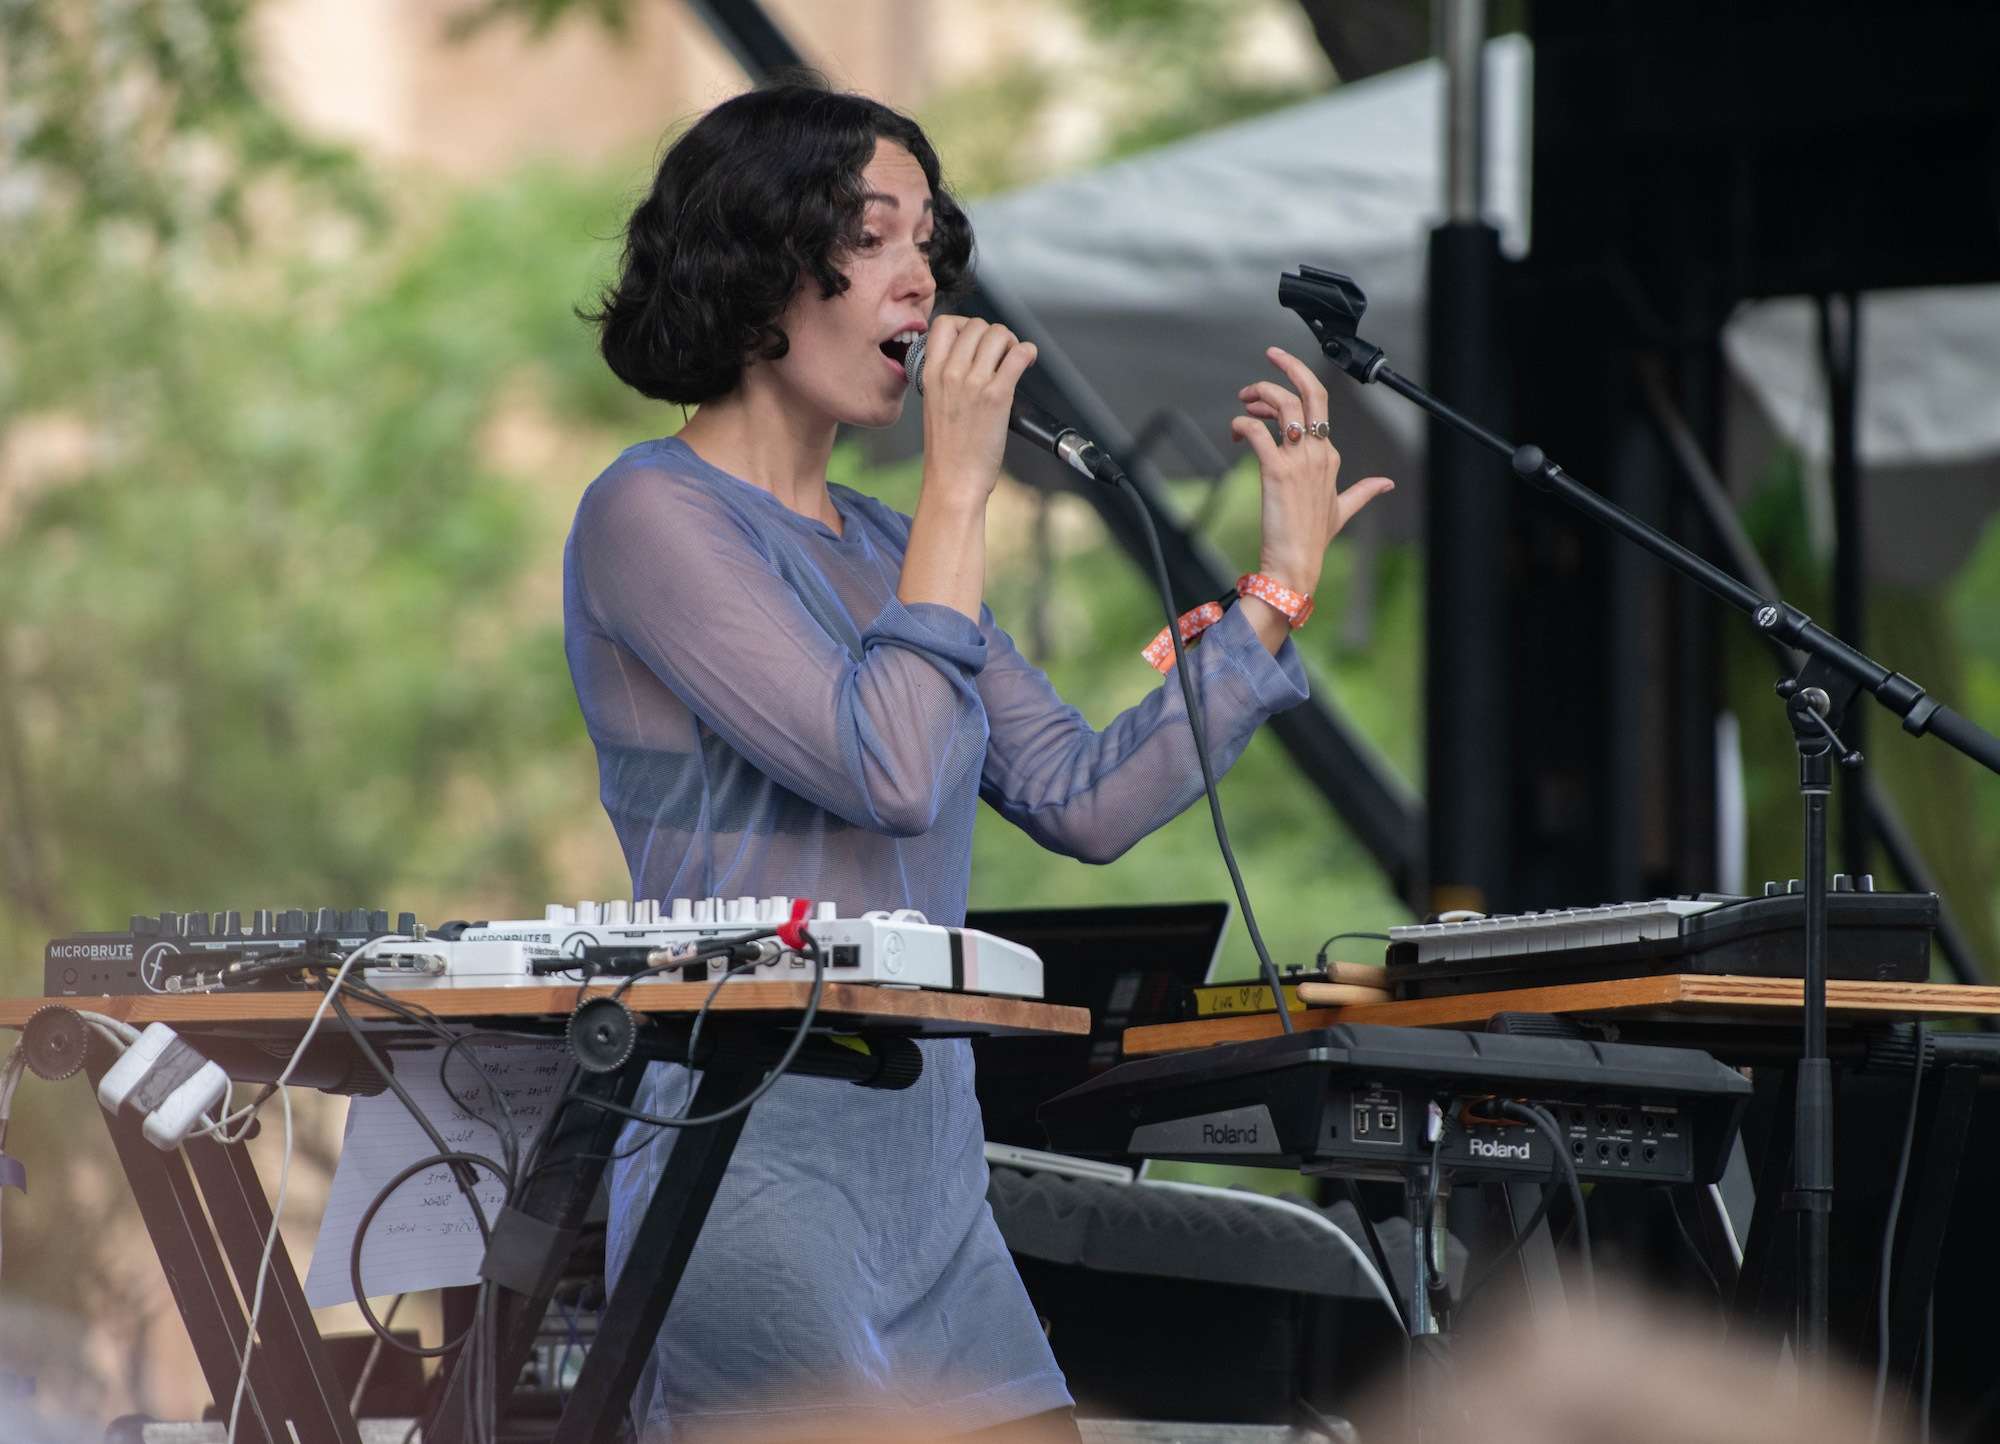 Kelly Lee Owens Live at Pitchfork Music Fest [GALLERY] 13